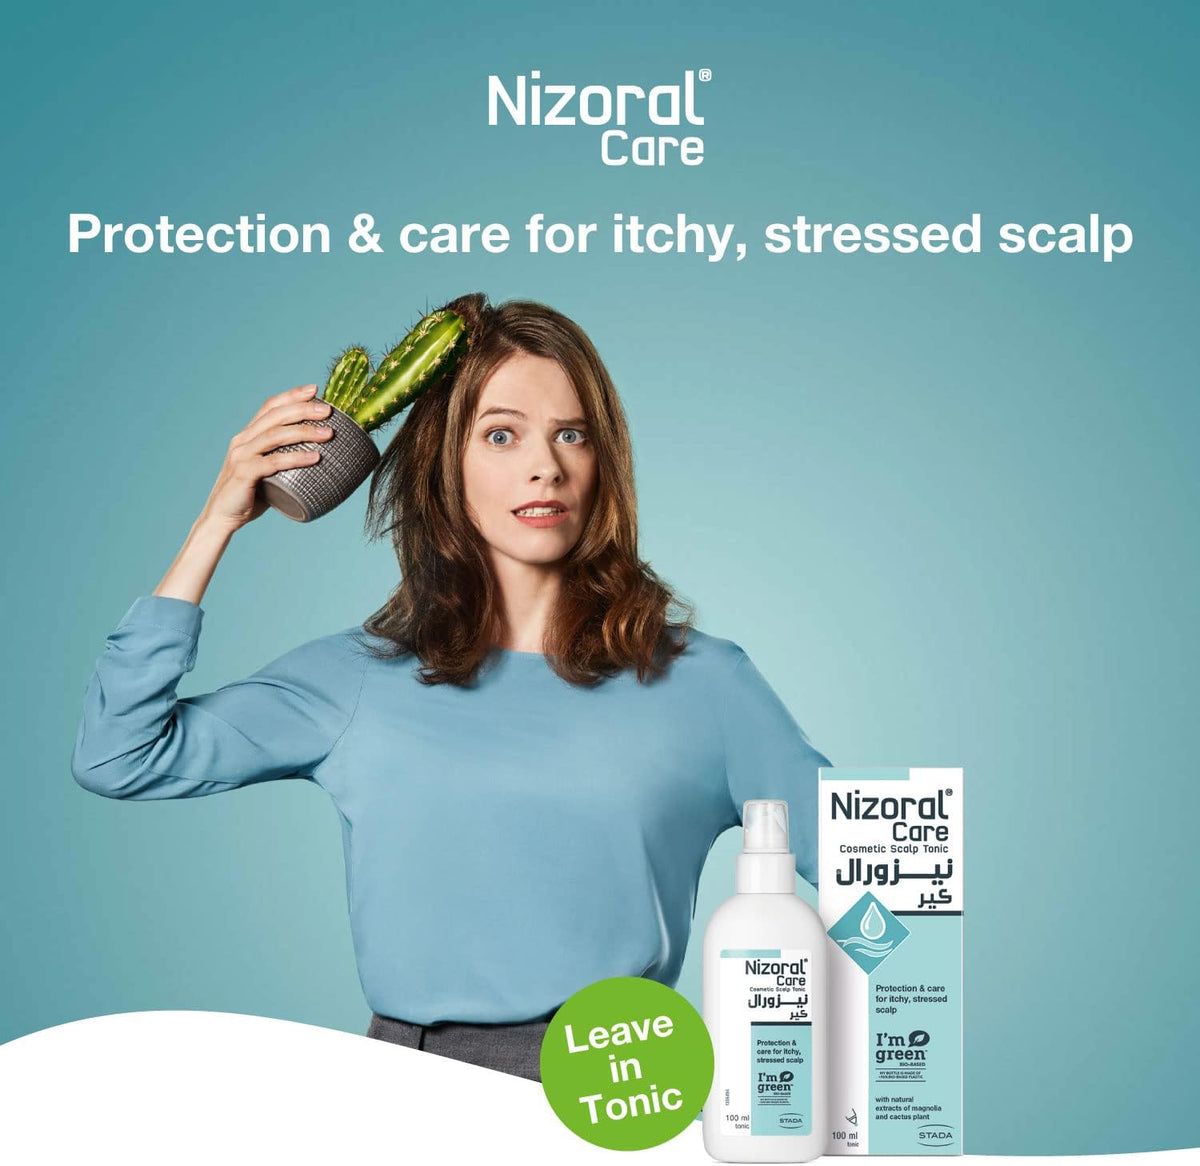 Nizoral Care Scalp Tonic - Protection & Care for Itchy and Stressed Scalp100ml